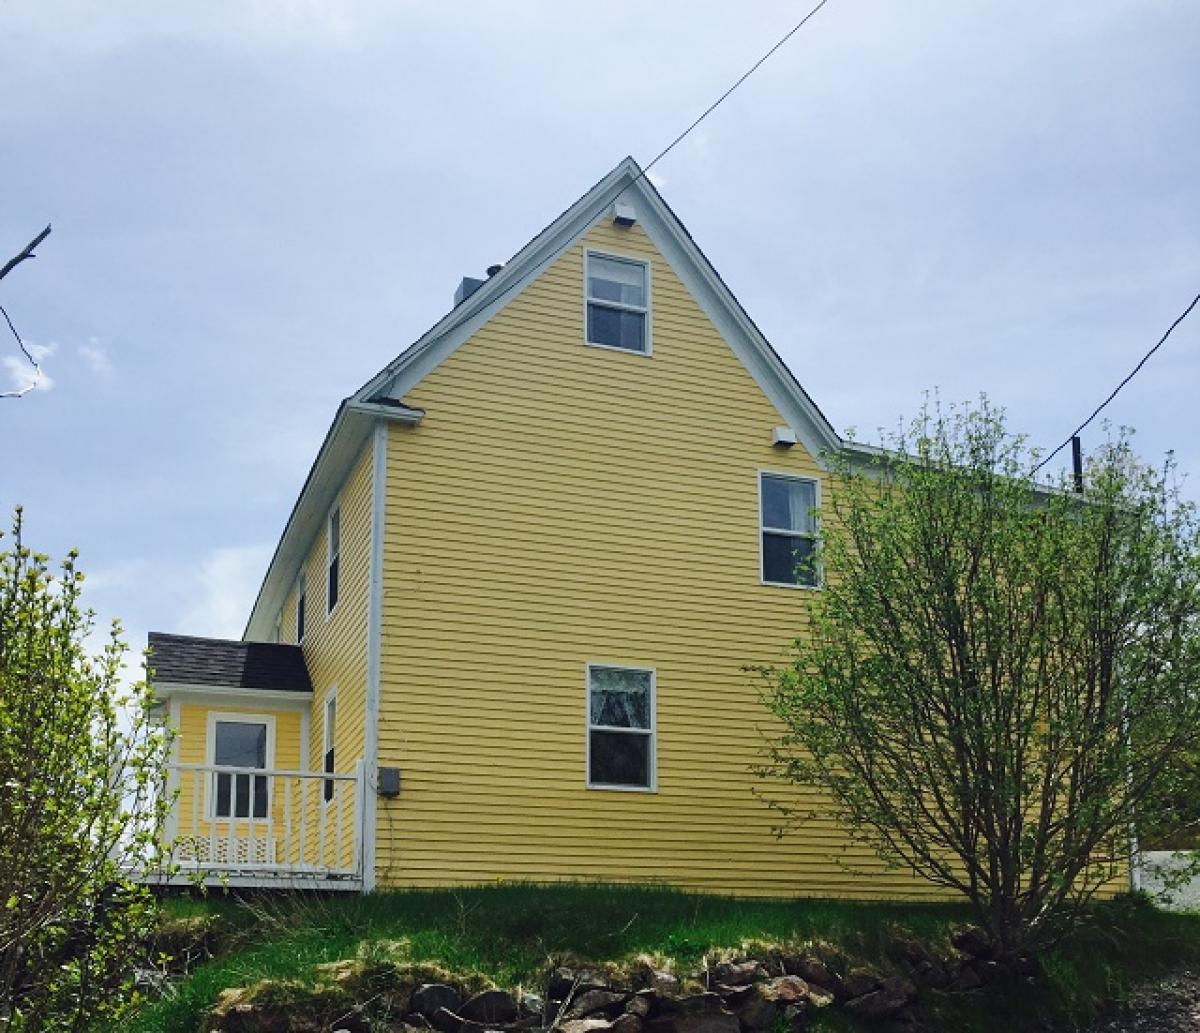 Picture of Vacation Home For Sale in Saint John's, Newfoundland and Labrador, Canada